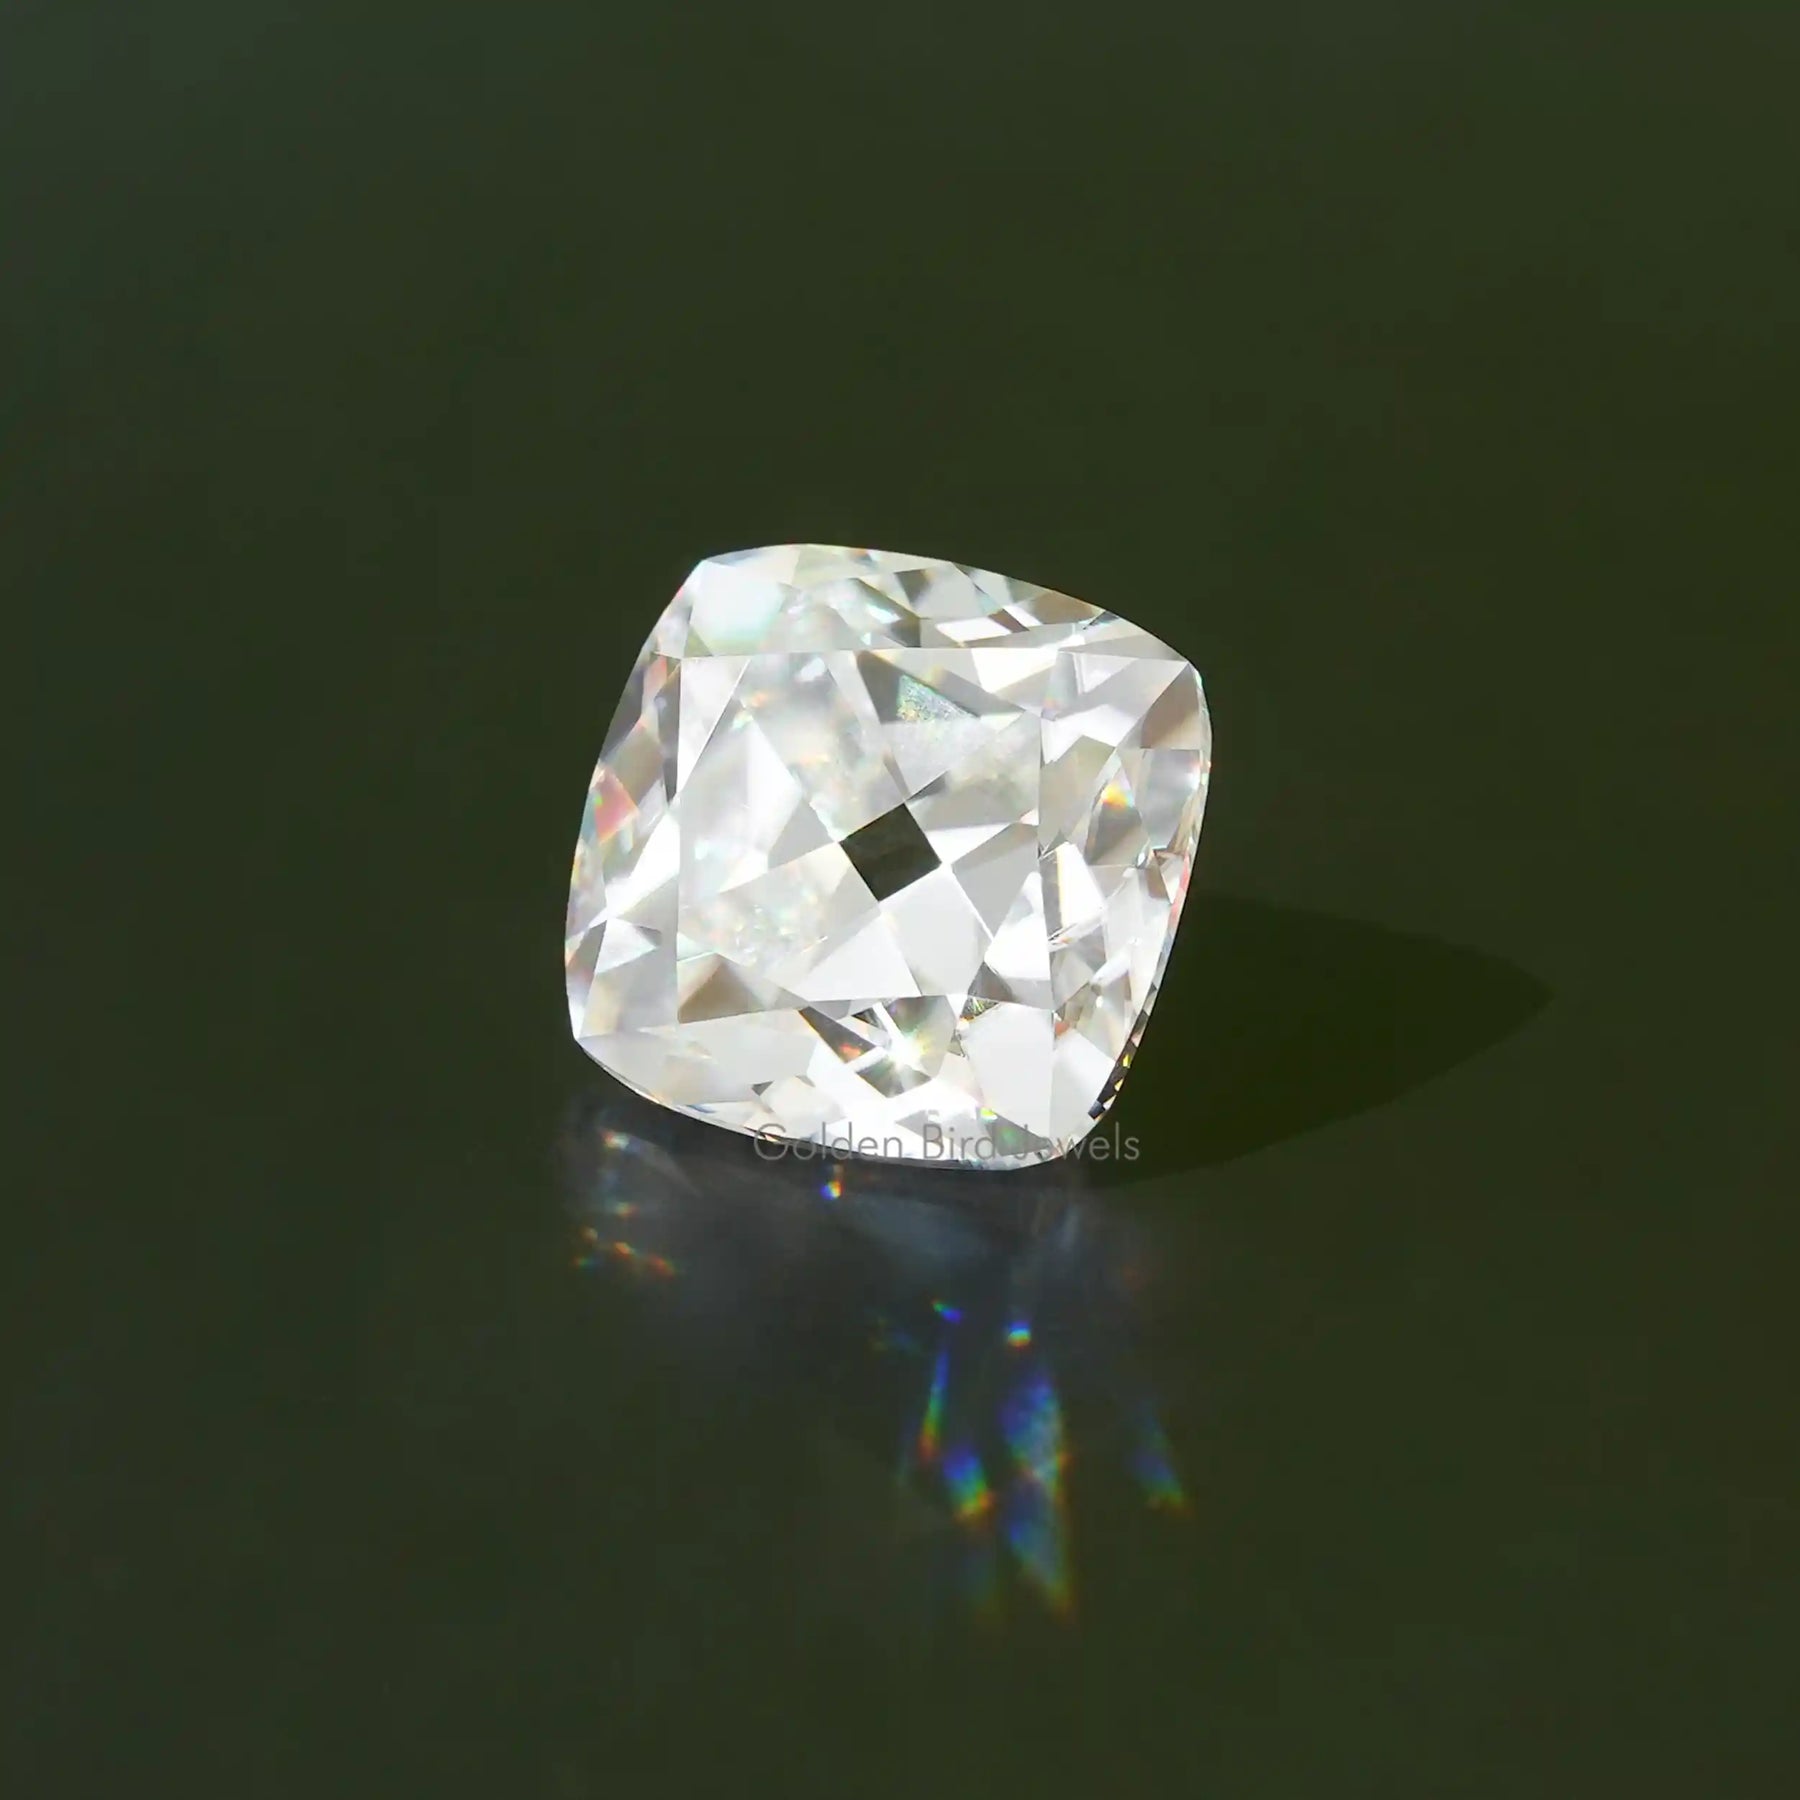 Old Cut Colorless Moissanite Loose Stone